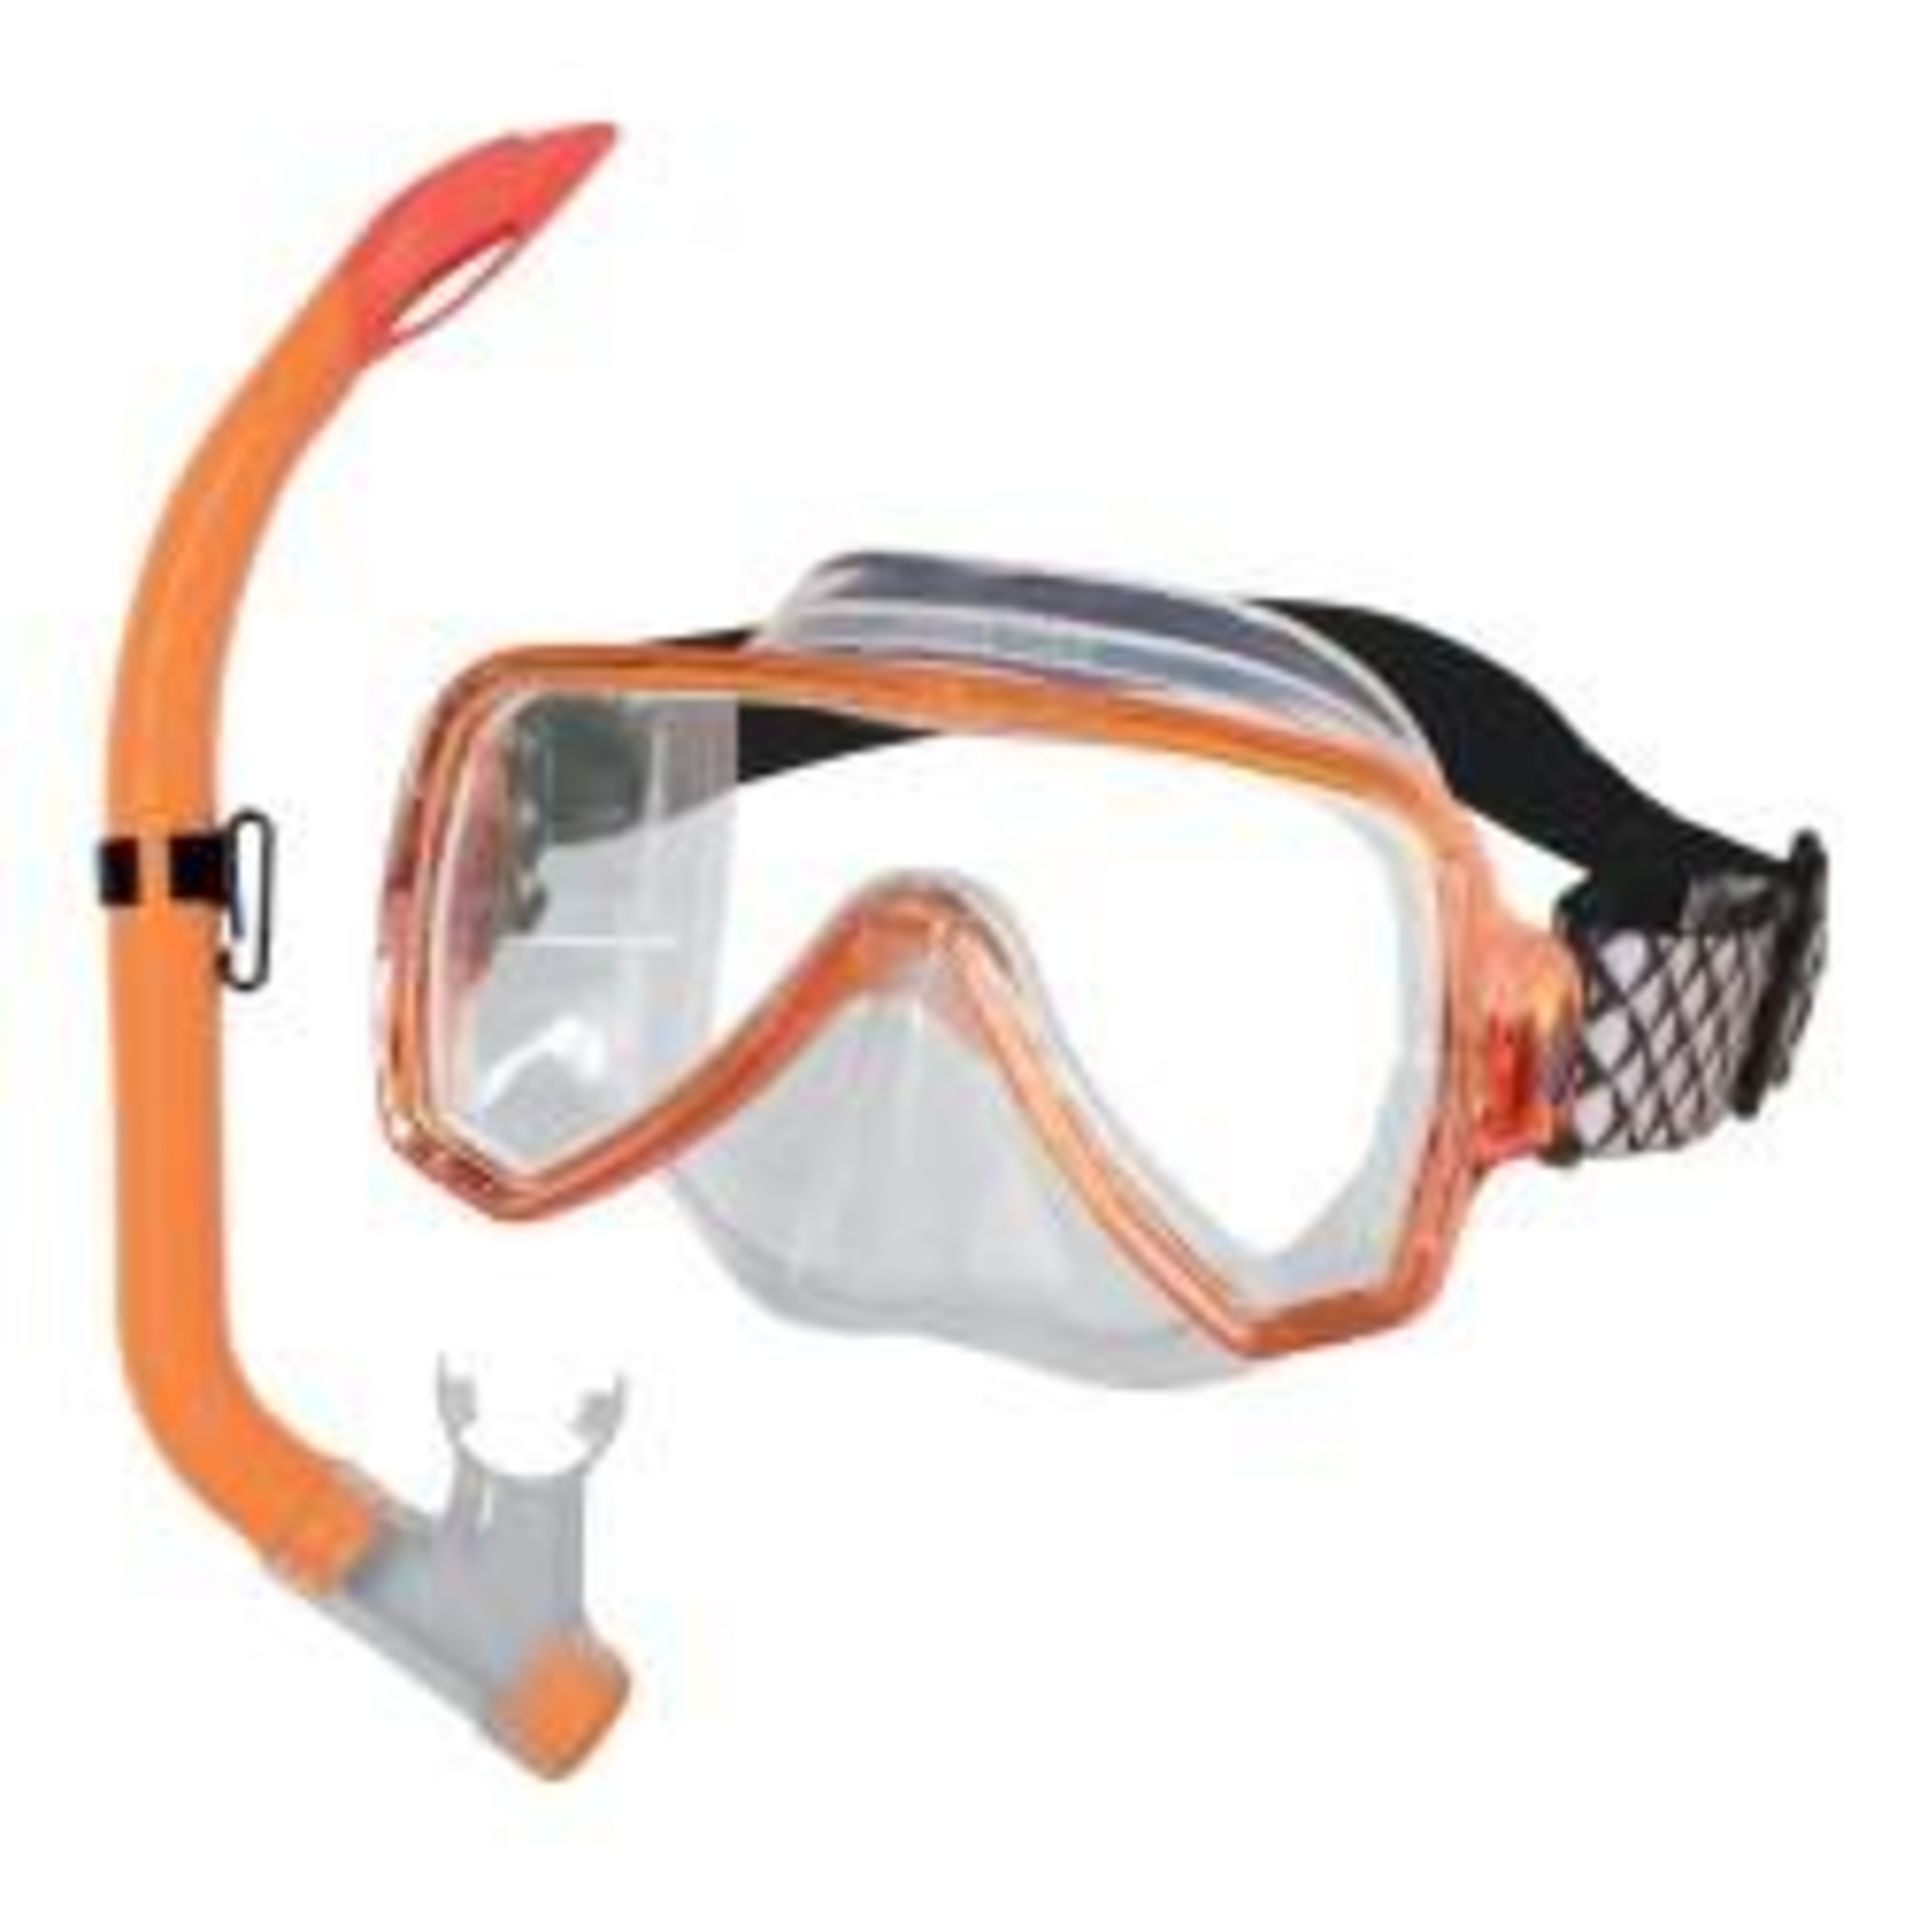 1 x New 8-12 Year Beuchat Oceo Snorkel and Mask Set In Orange - NS447 - CL349 - Location: Altrincham